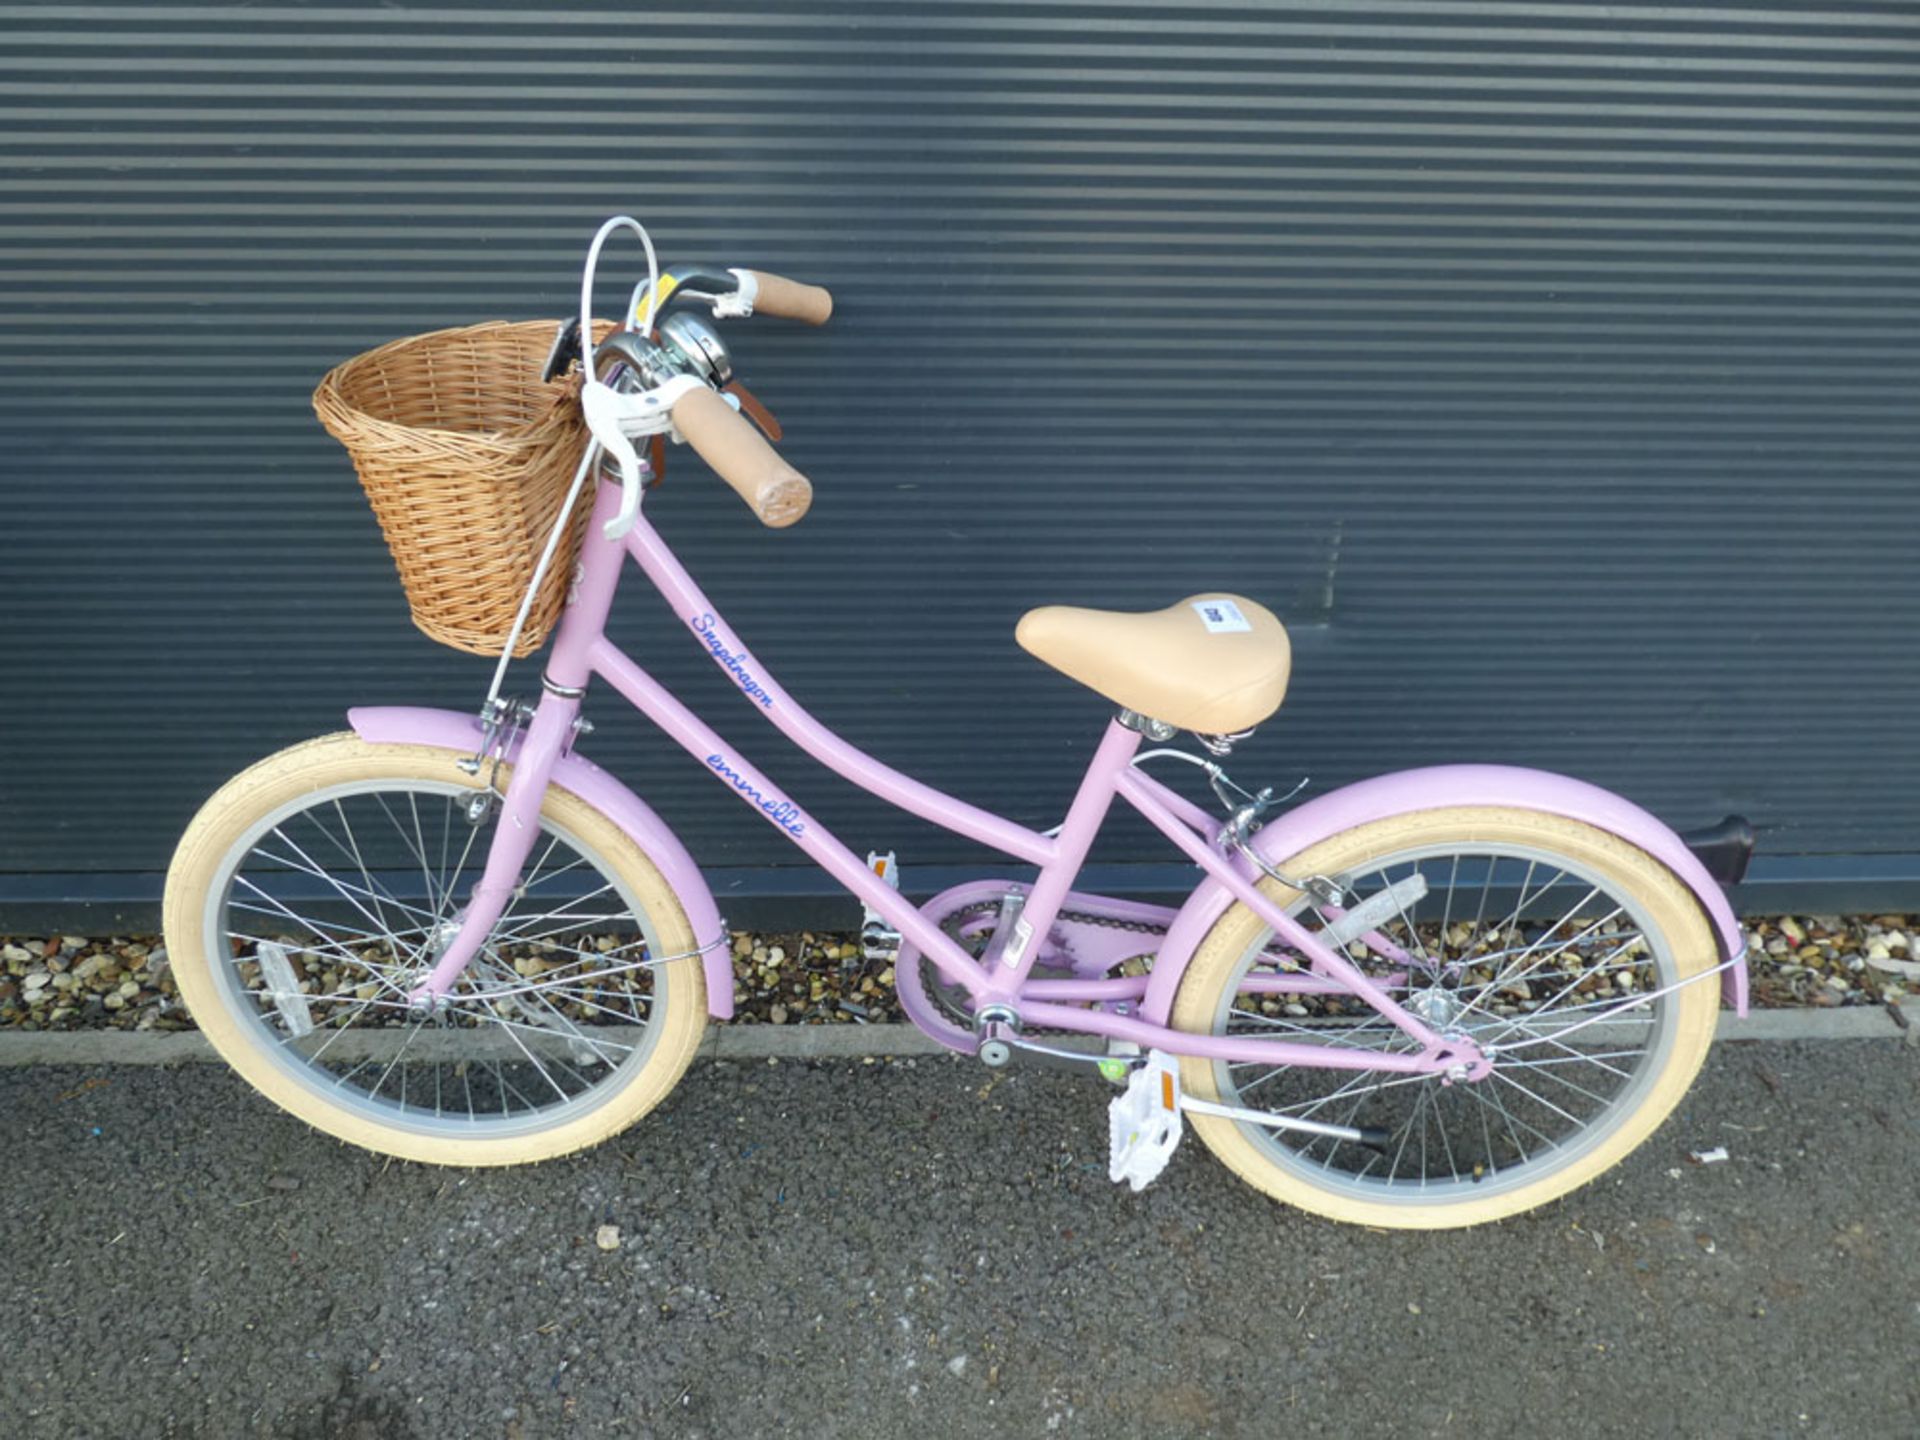 Pink small childs bike with front basket